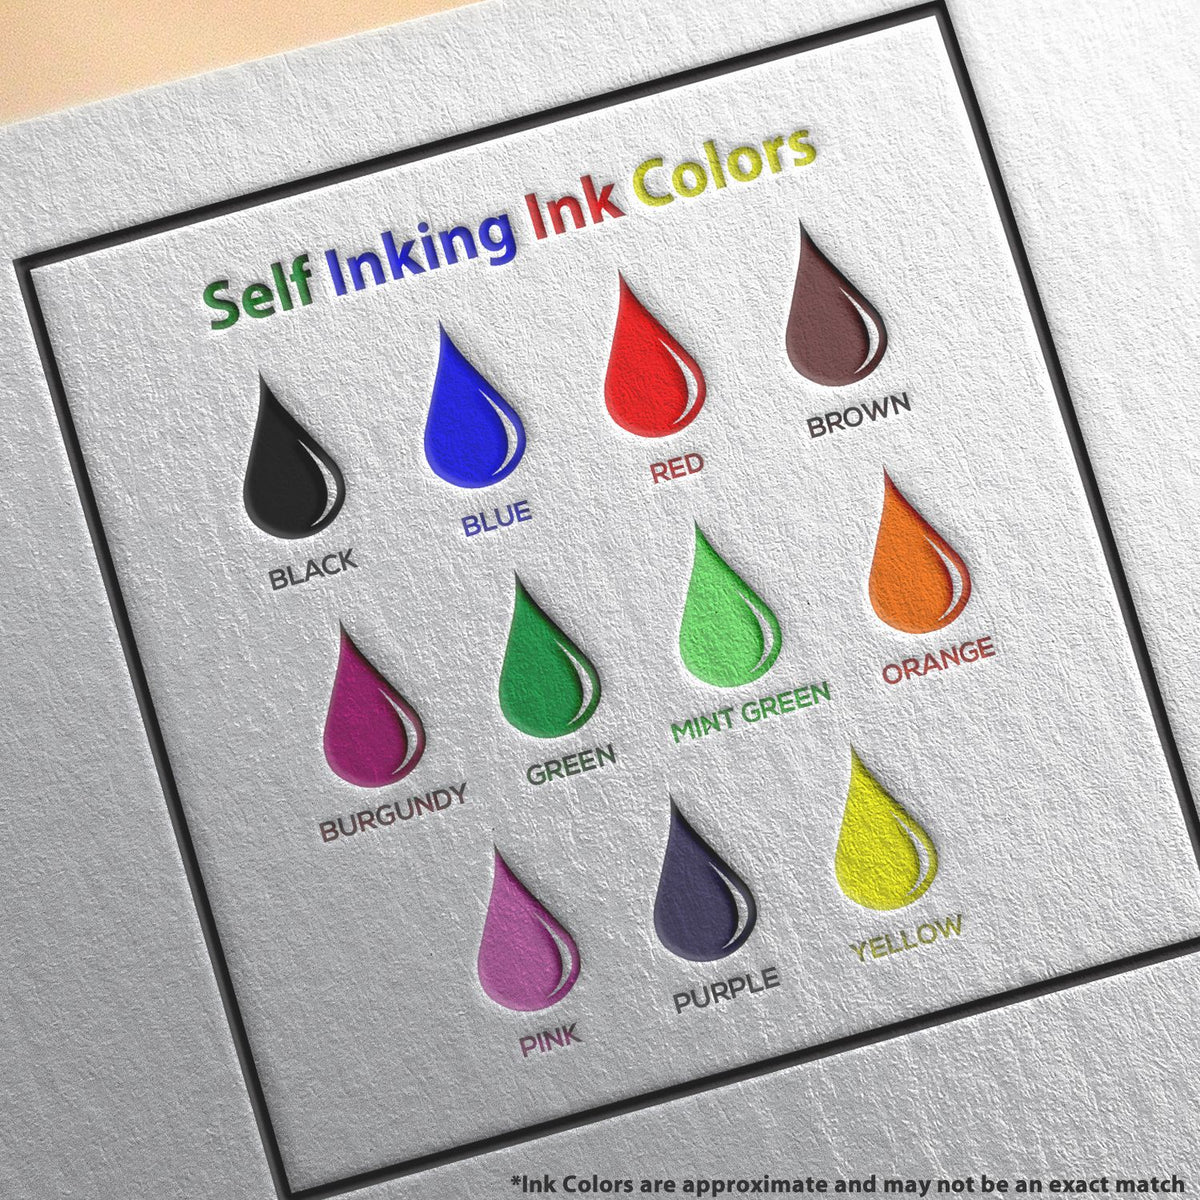 A picture showing the different ink colors or hues available for the Heavy-Duty Texas Rectangular Notary Stamp product.